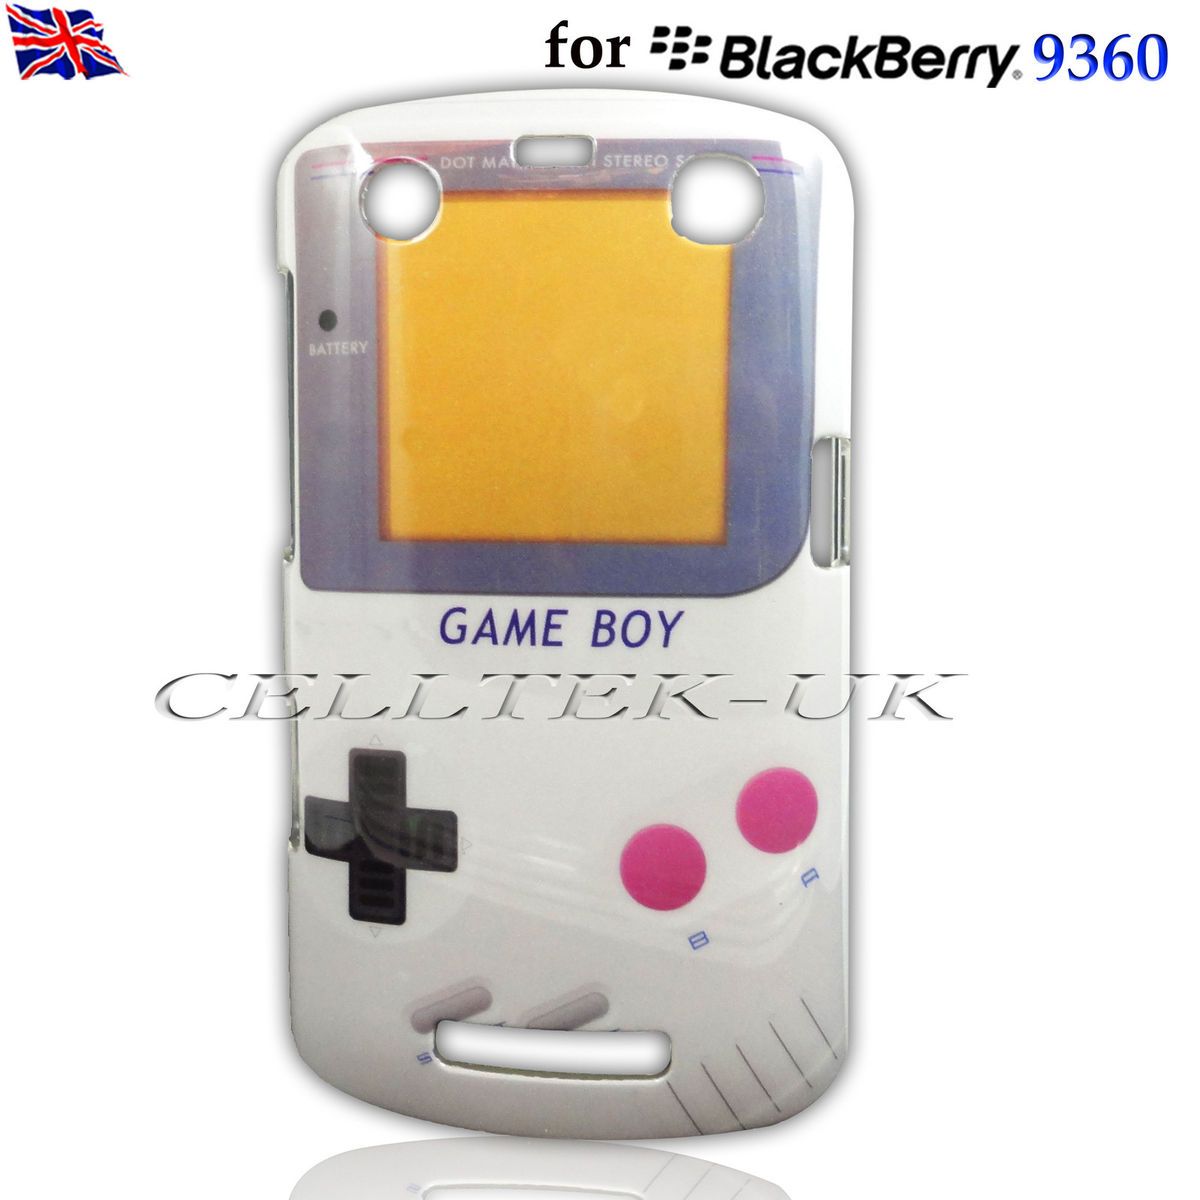 Game Boy Hard Case Cover for Blackberry Curve 9360